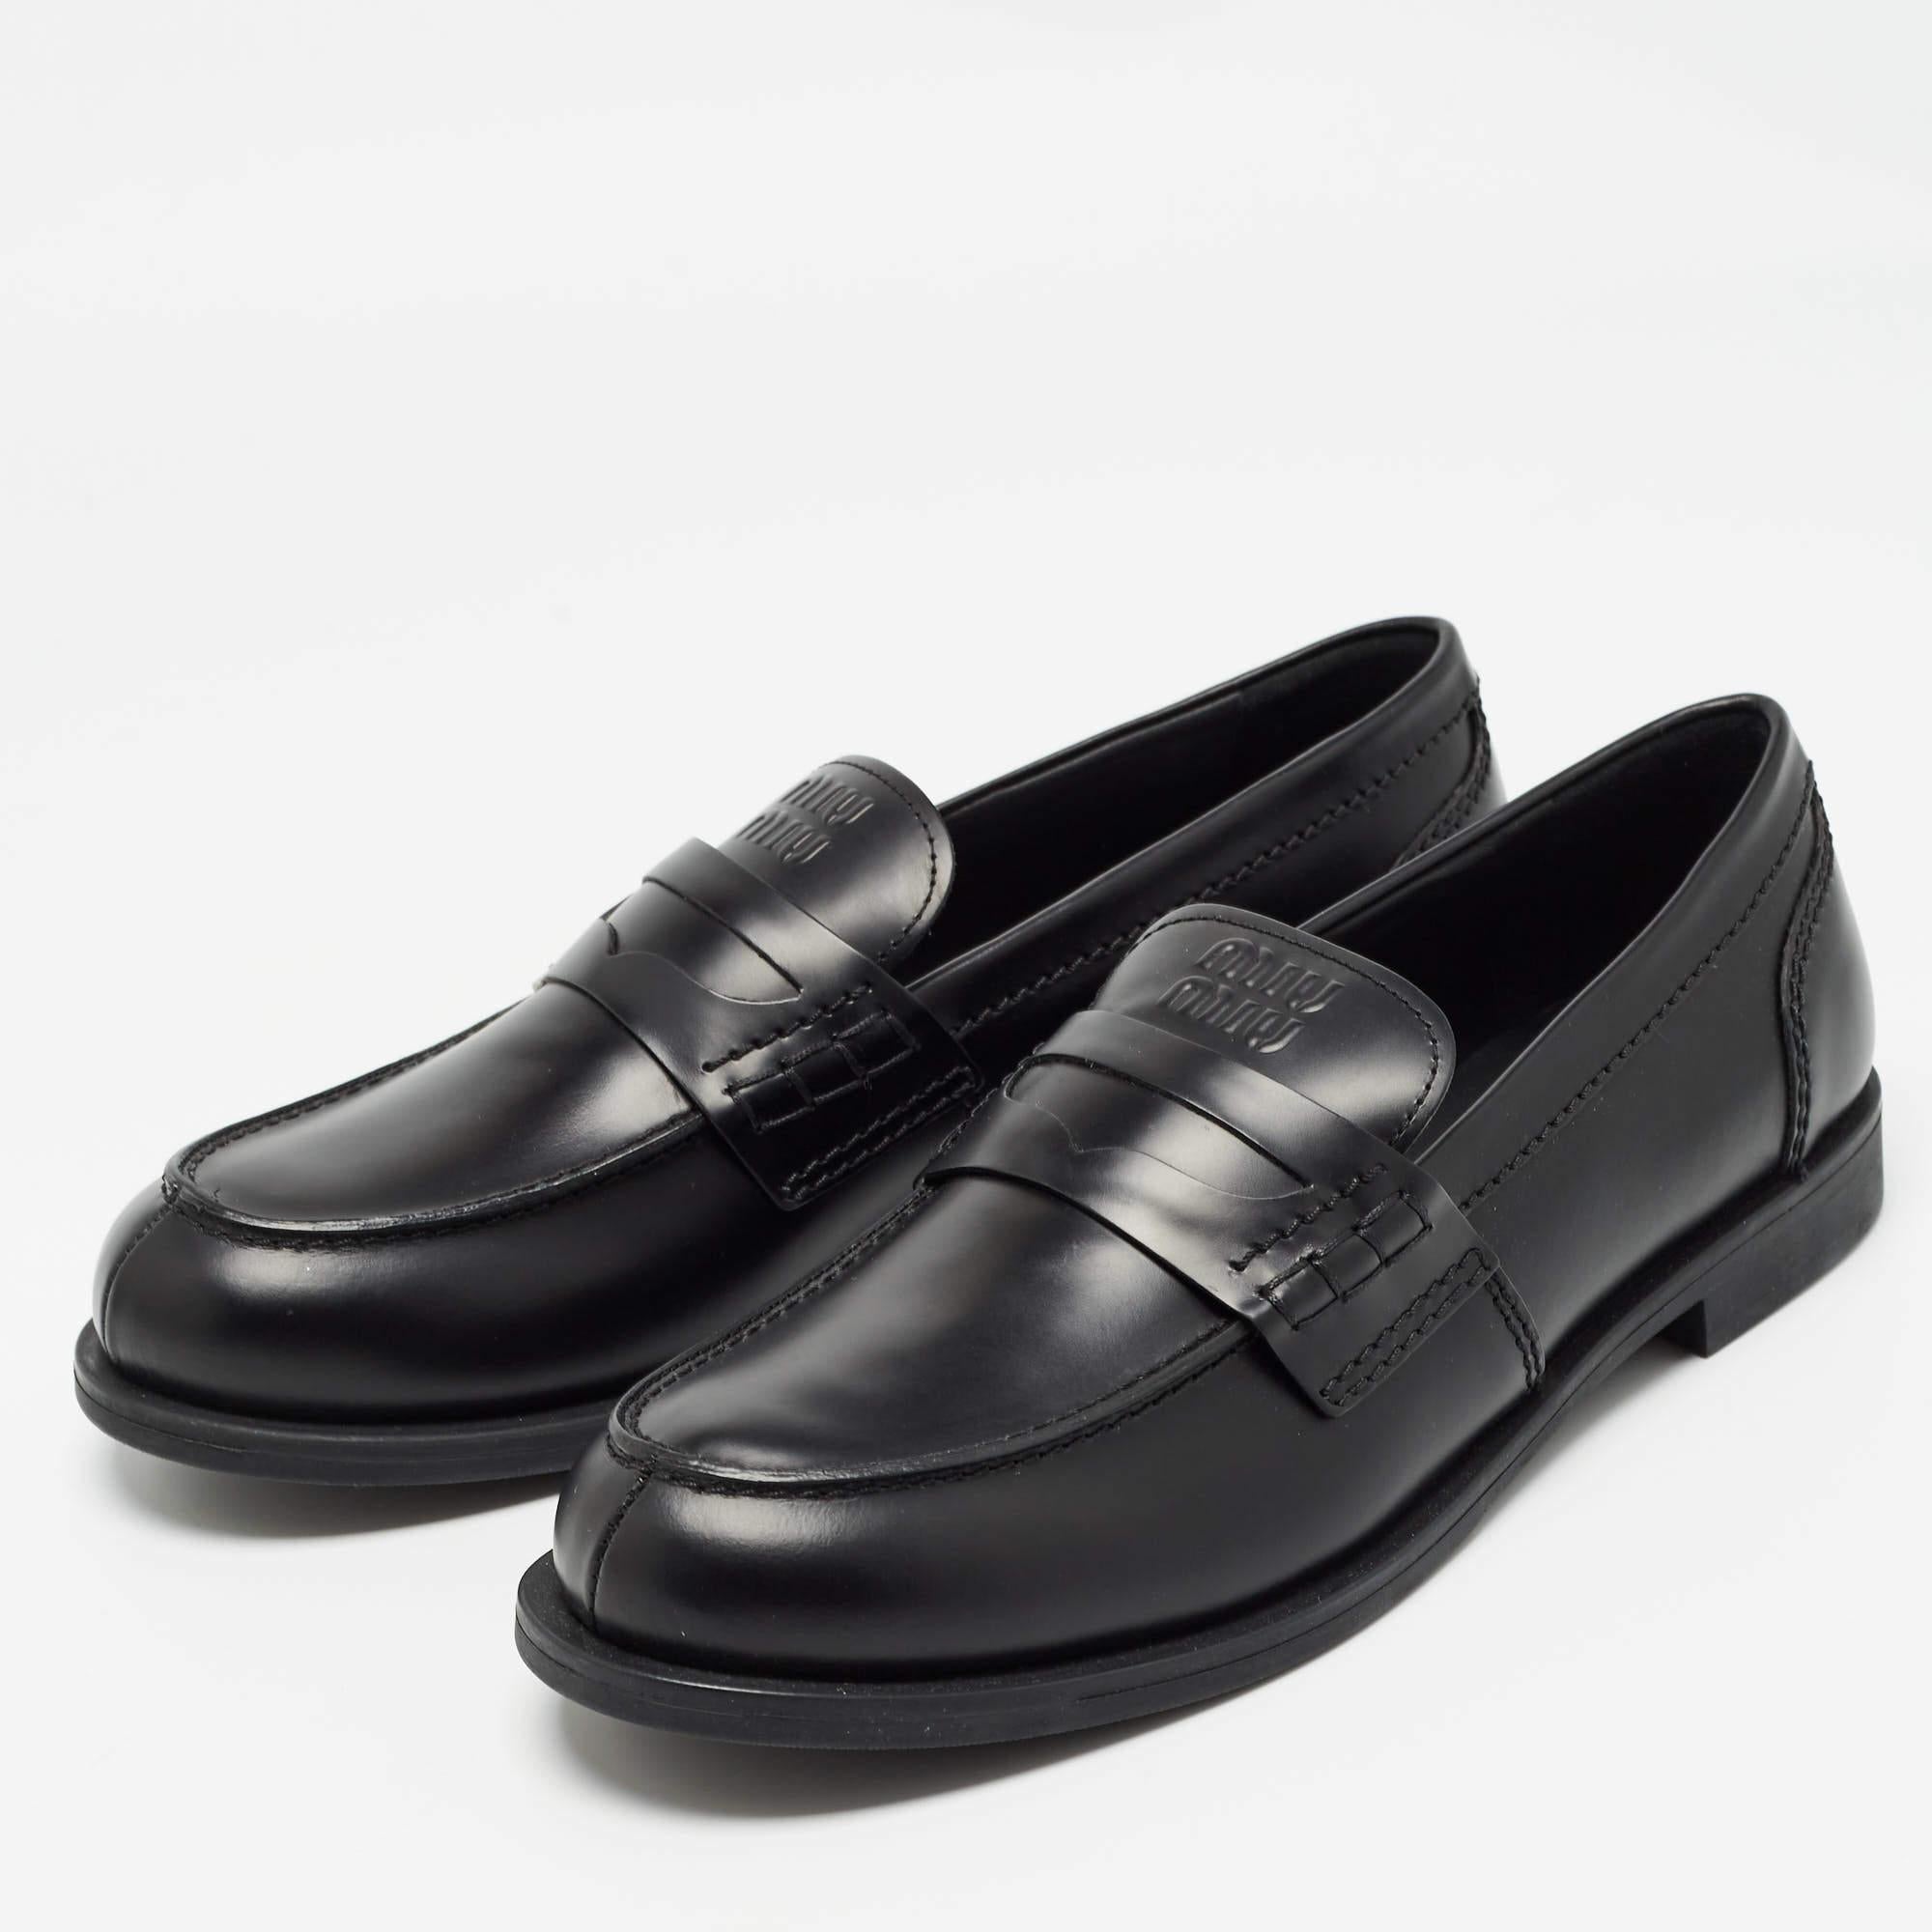 Miu Miu Black Leather Slip On Loafers Size 39.5 For Sale 4